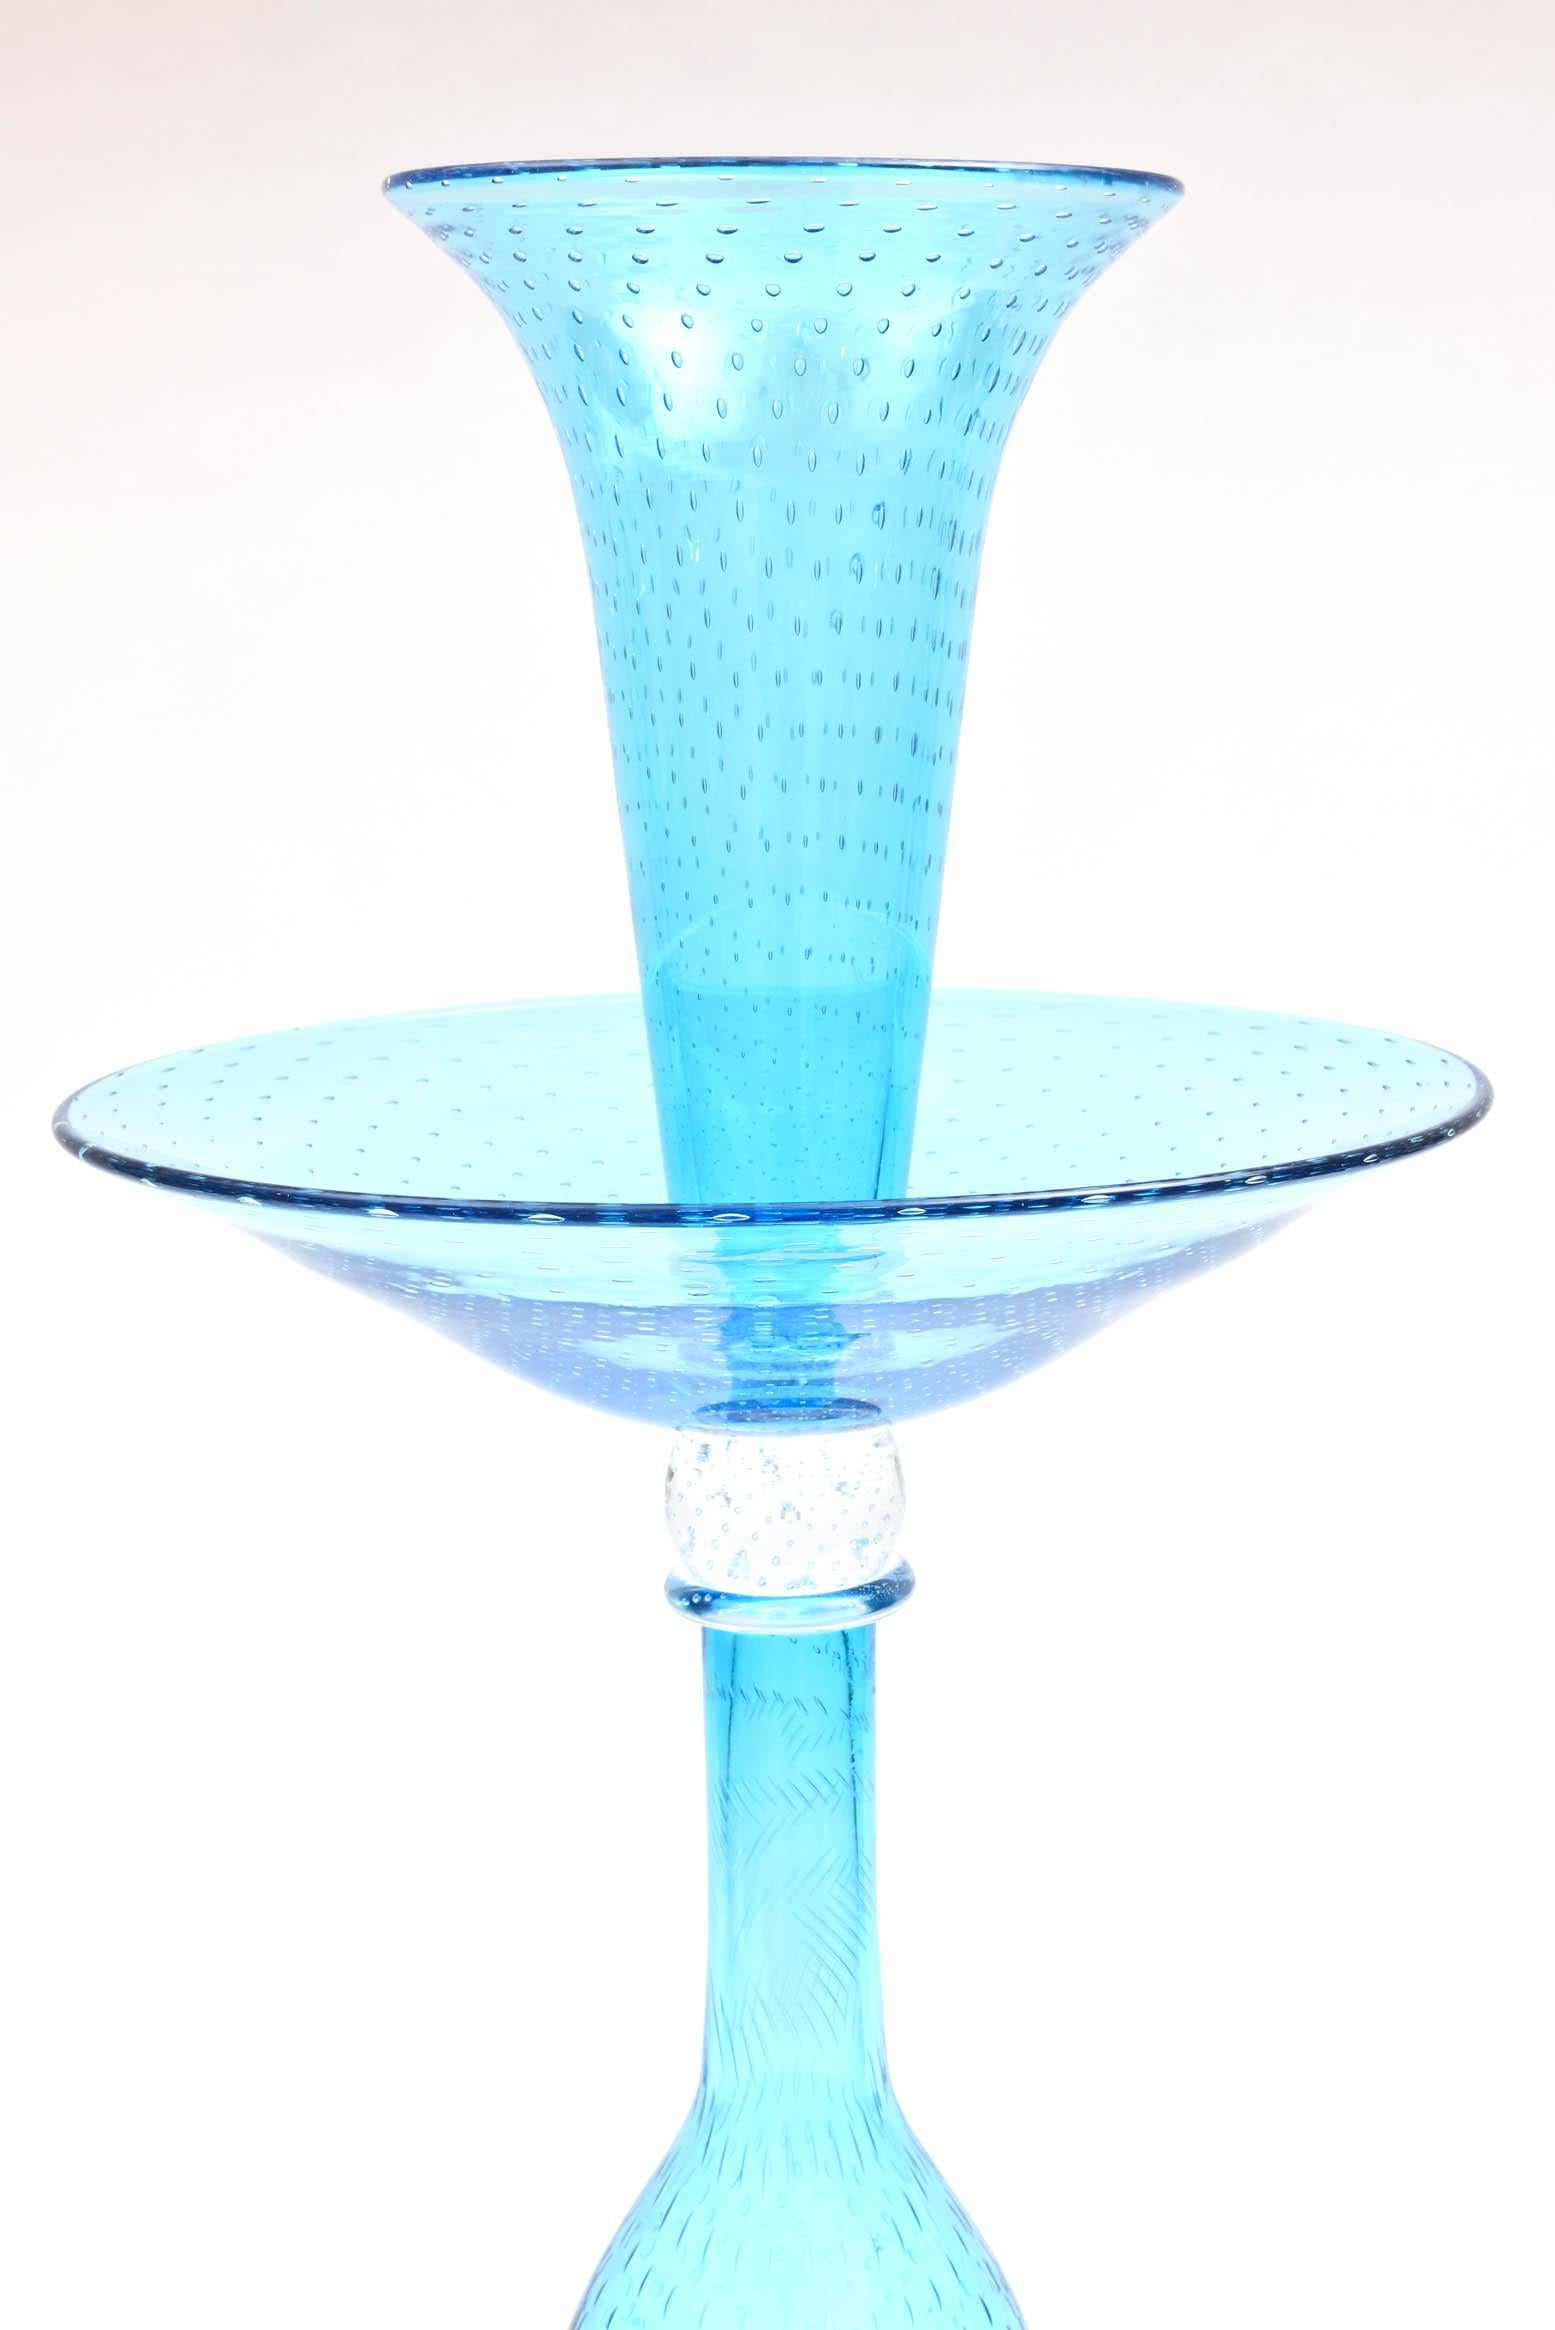 An exquisite tall and impressive centrepiece that we have commissioned from original archives. Beautiful and hard to find turquoise blue with signature controlled bubble base created by master glass blowers using original equipment and centuries old